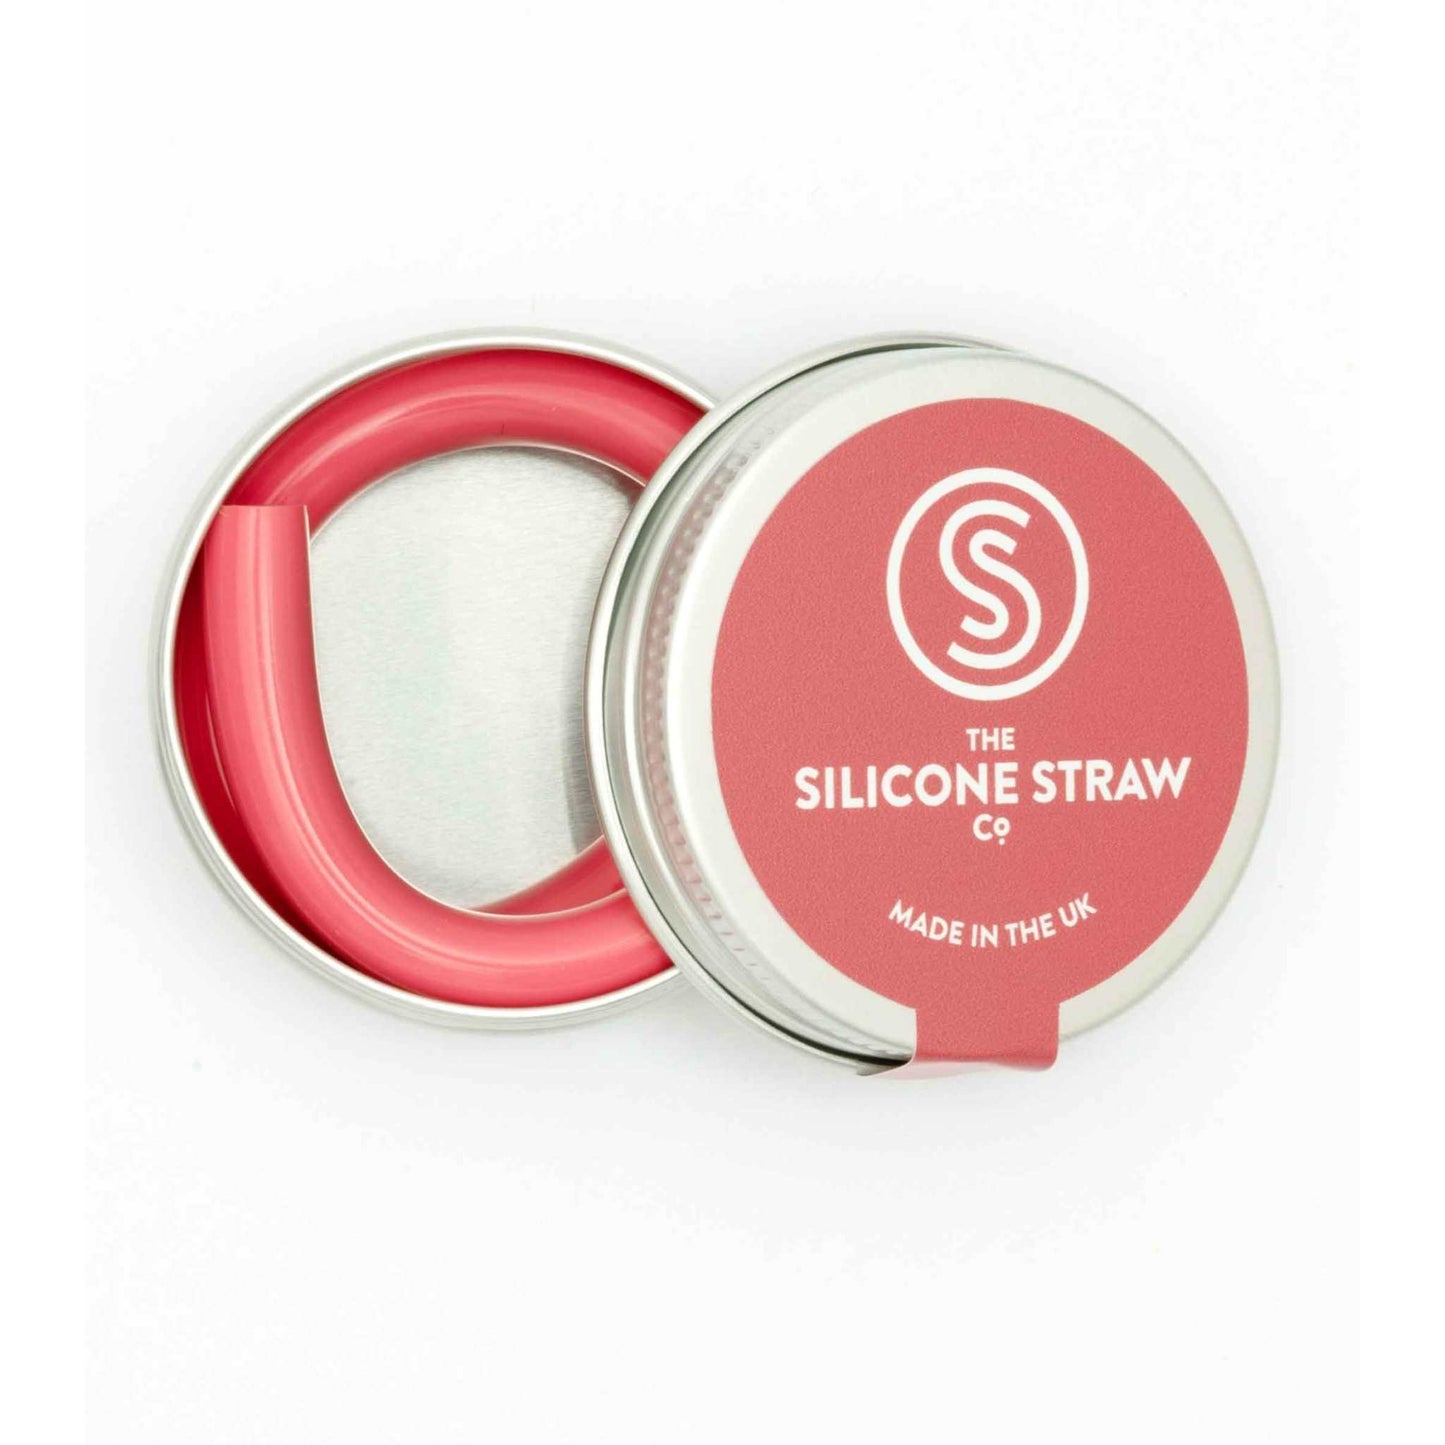 The Silicone Straw Co. Drinking Straws & Stirrers Reusable Silicone Straw in Travel Tin - The Silicone Straw Co.